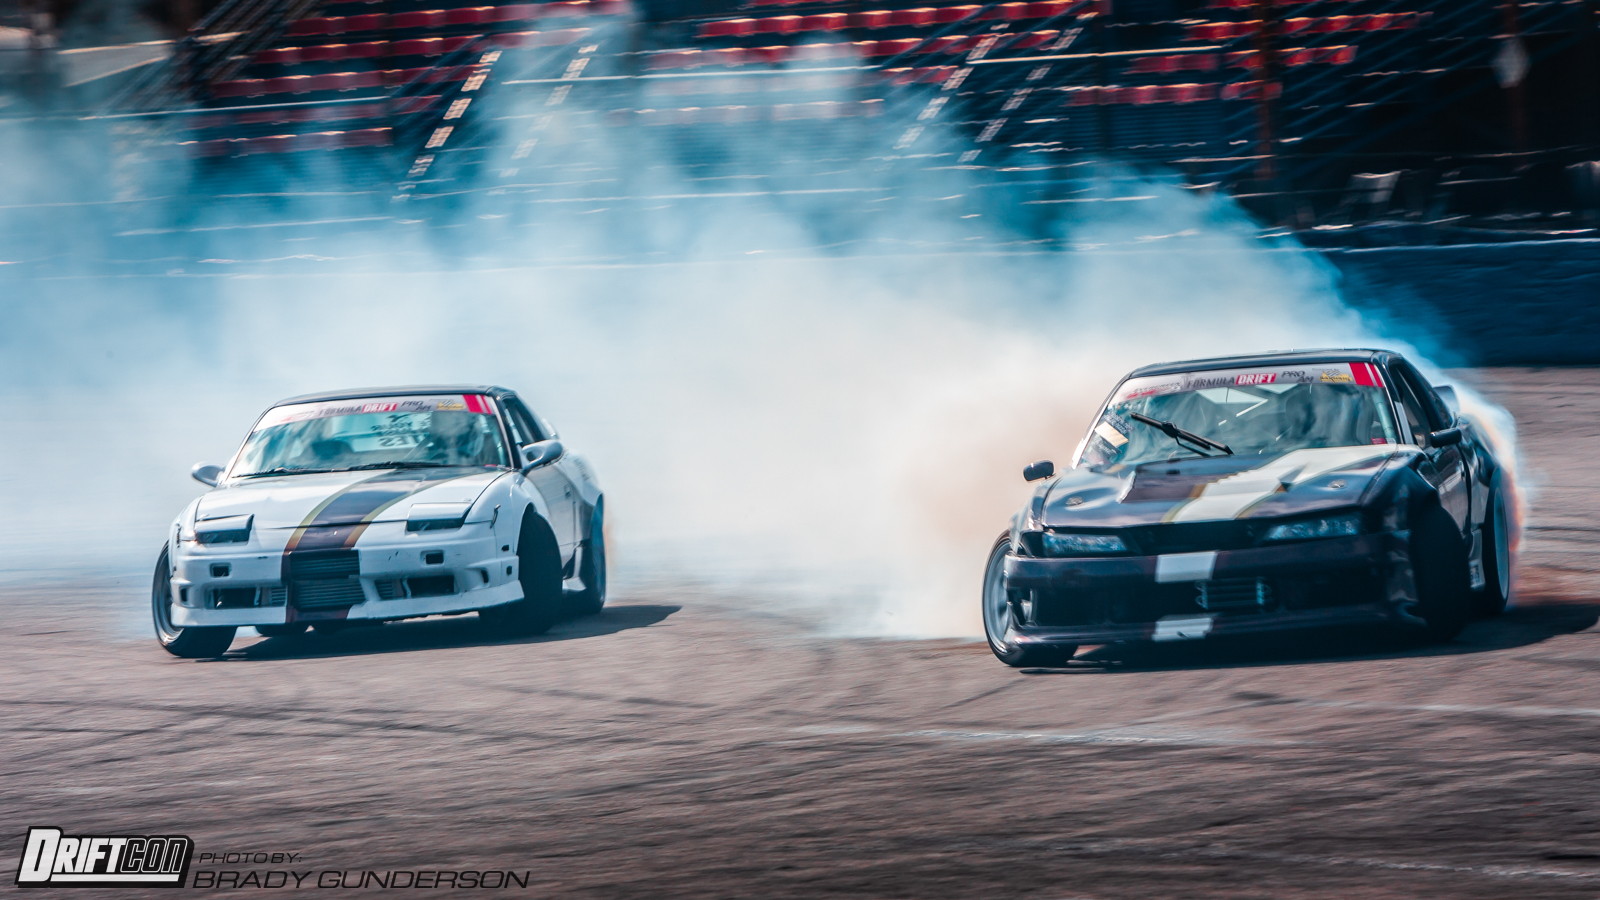 Crewsade to offer passenger drift experiences at this year's show